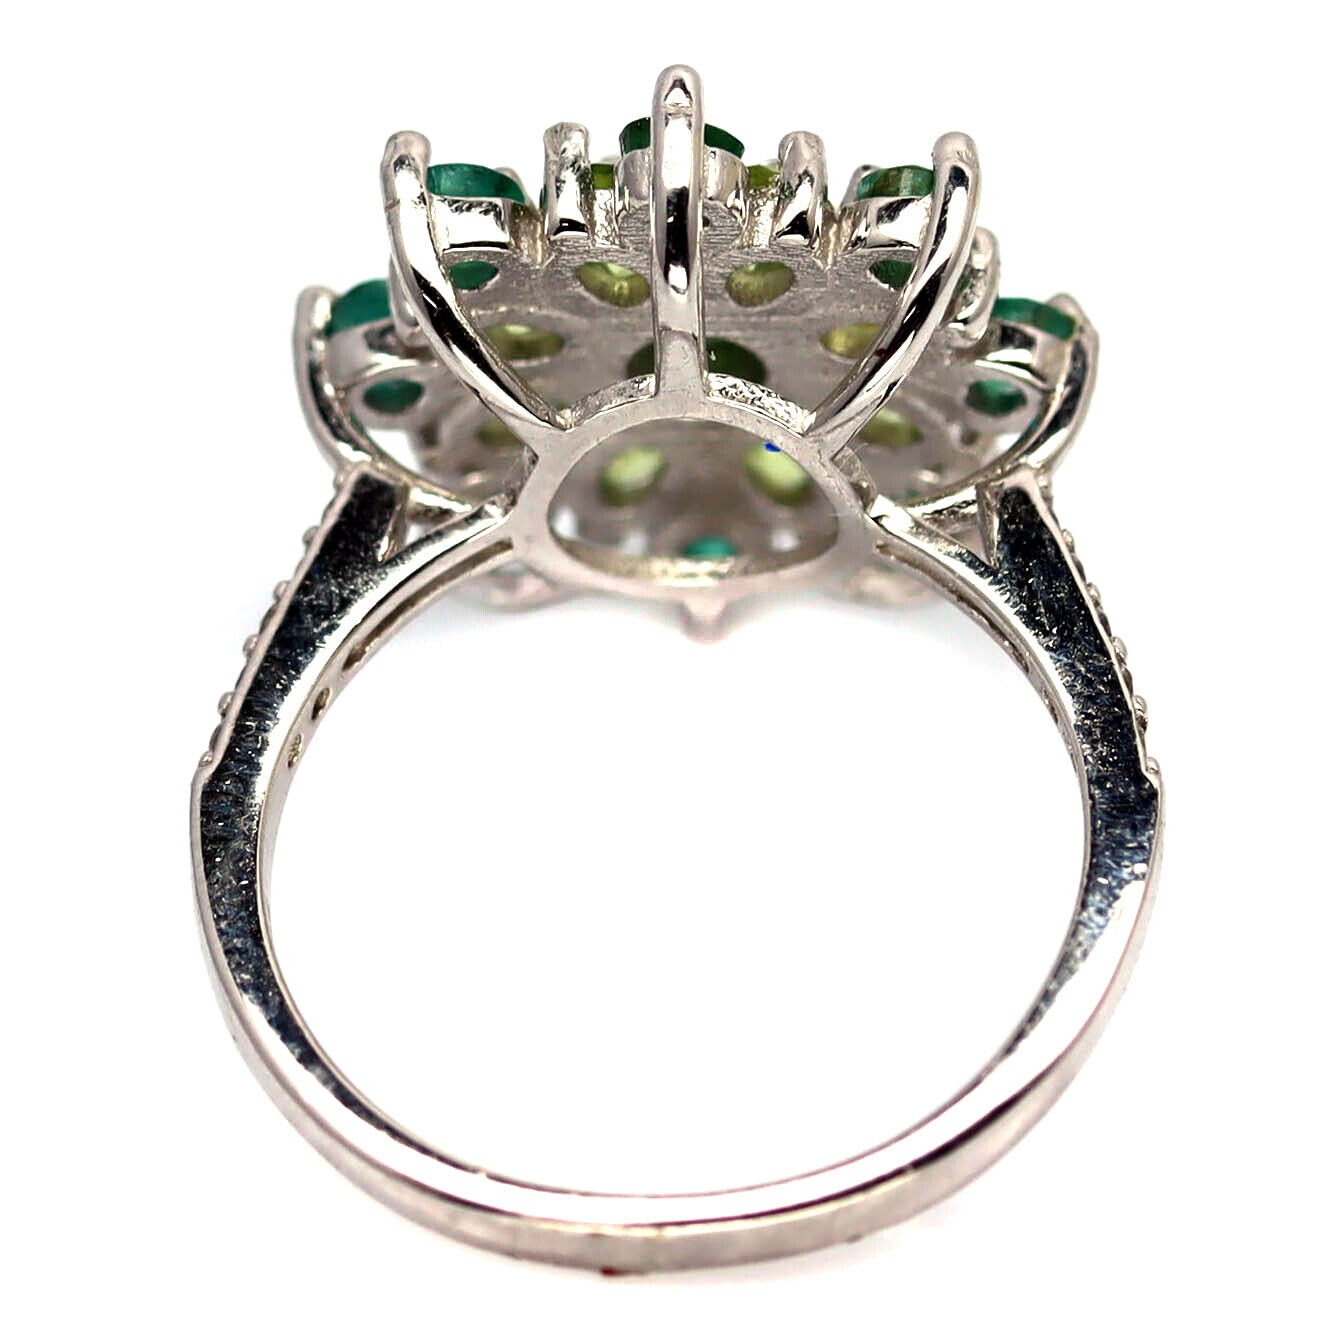 A 925 silver cluster ring set with emerald and peridot, (N.5). - Image 2 of 2